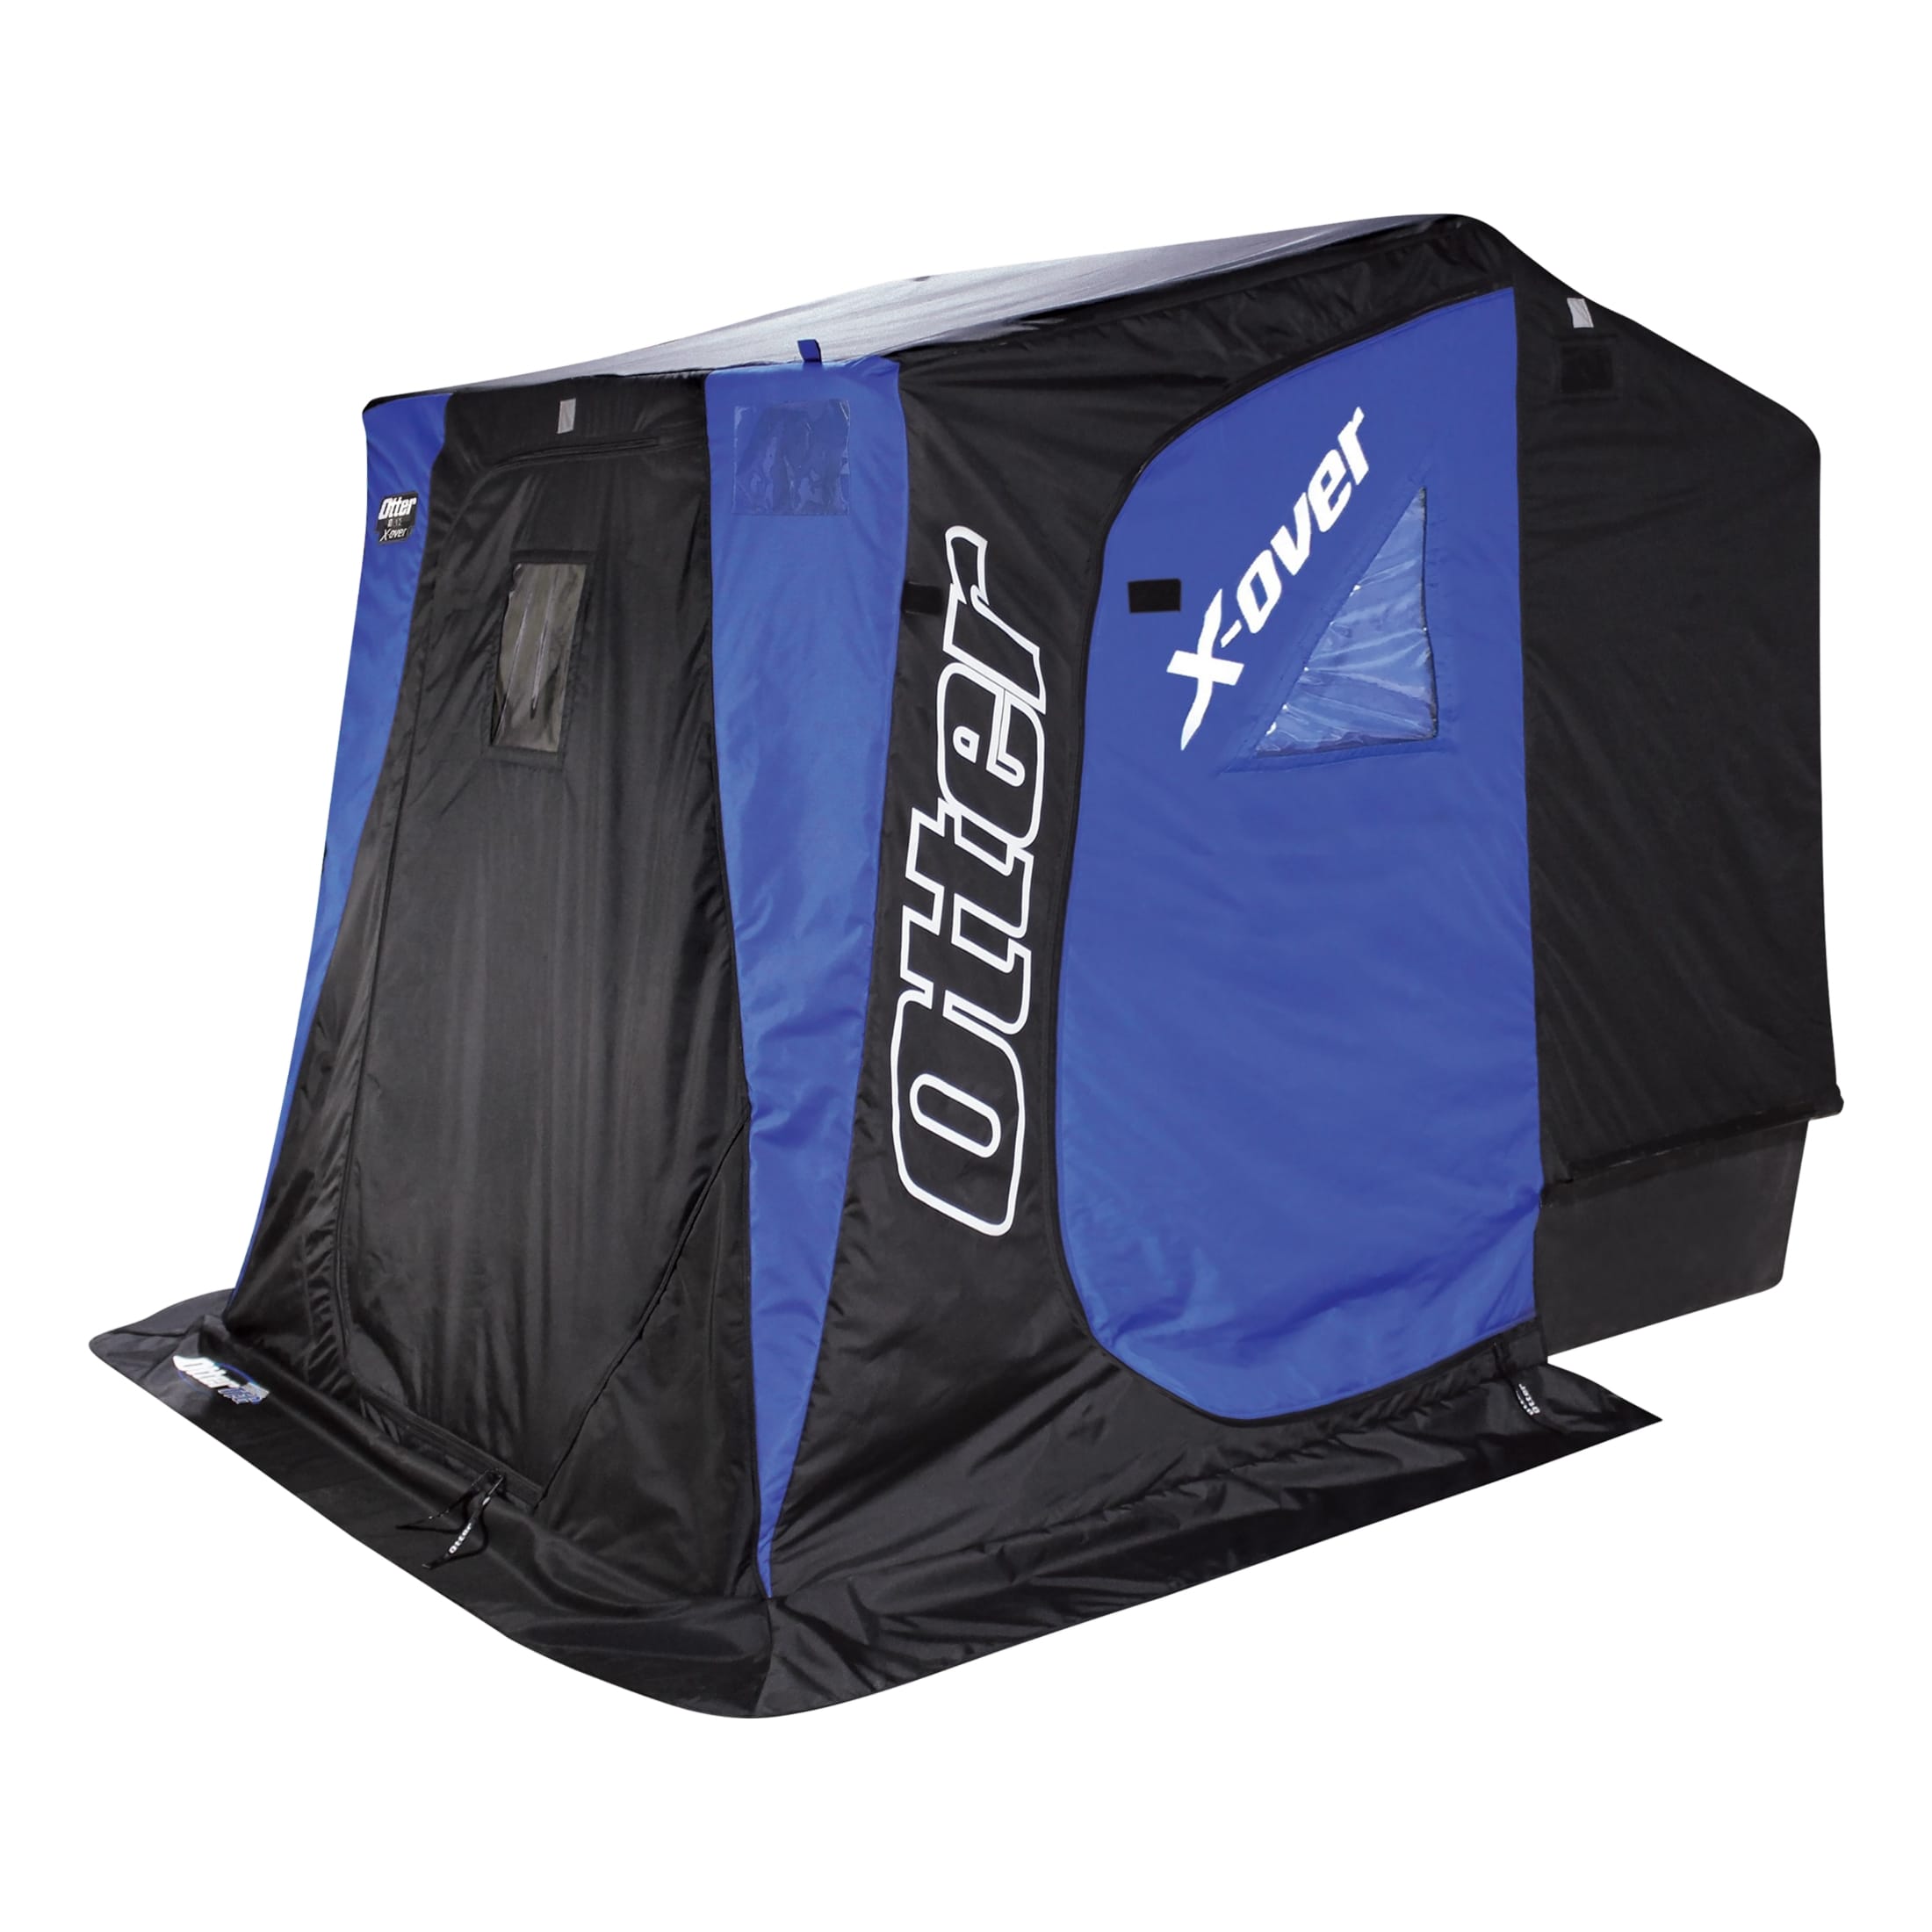 Otter Outdoors XT X-Over Cabin Ice Shelter | Cabela's Canada